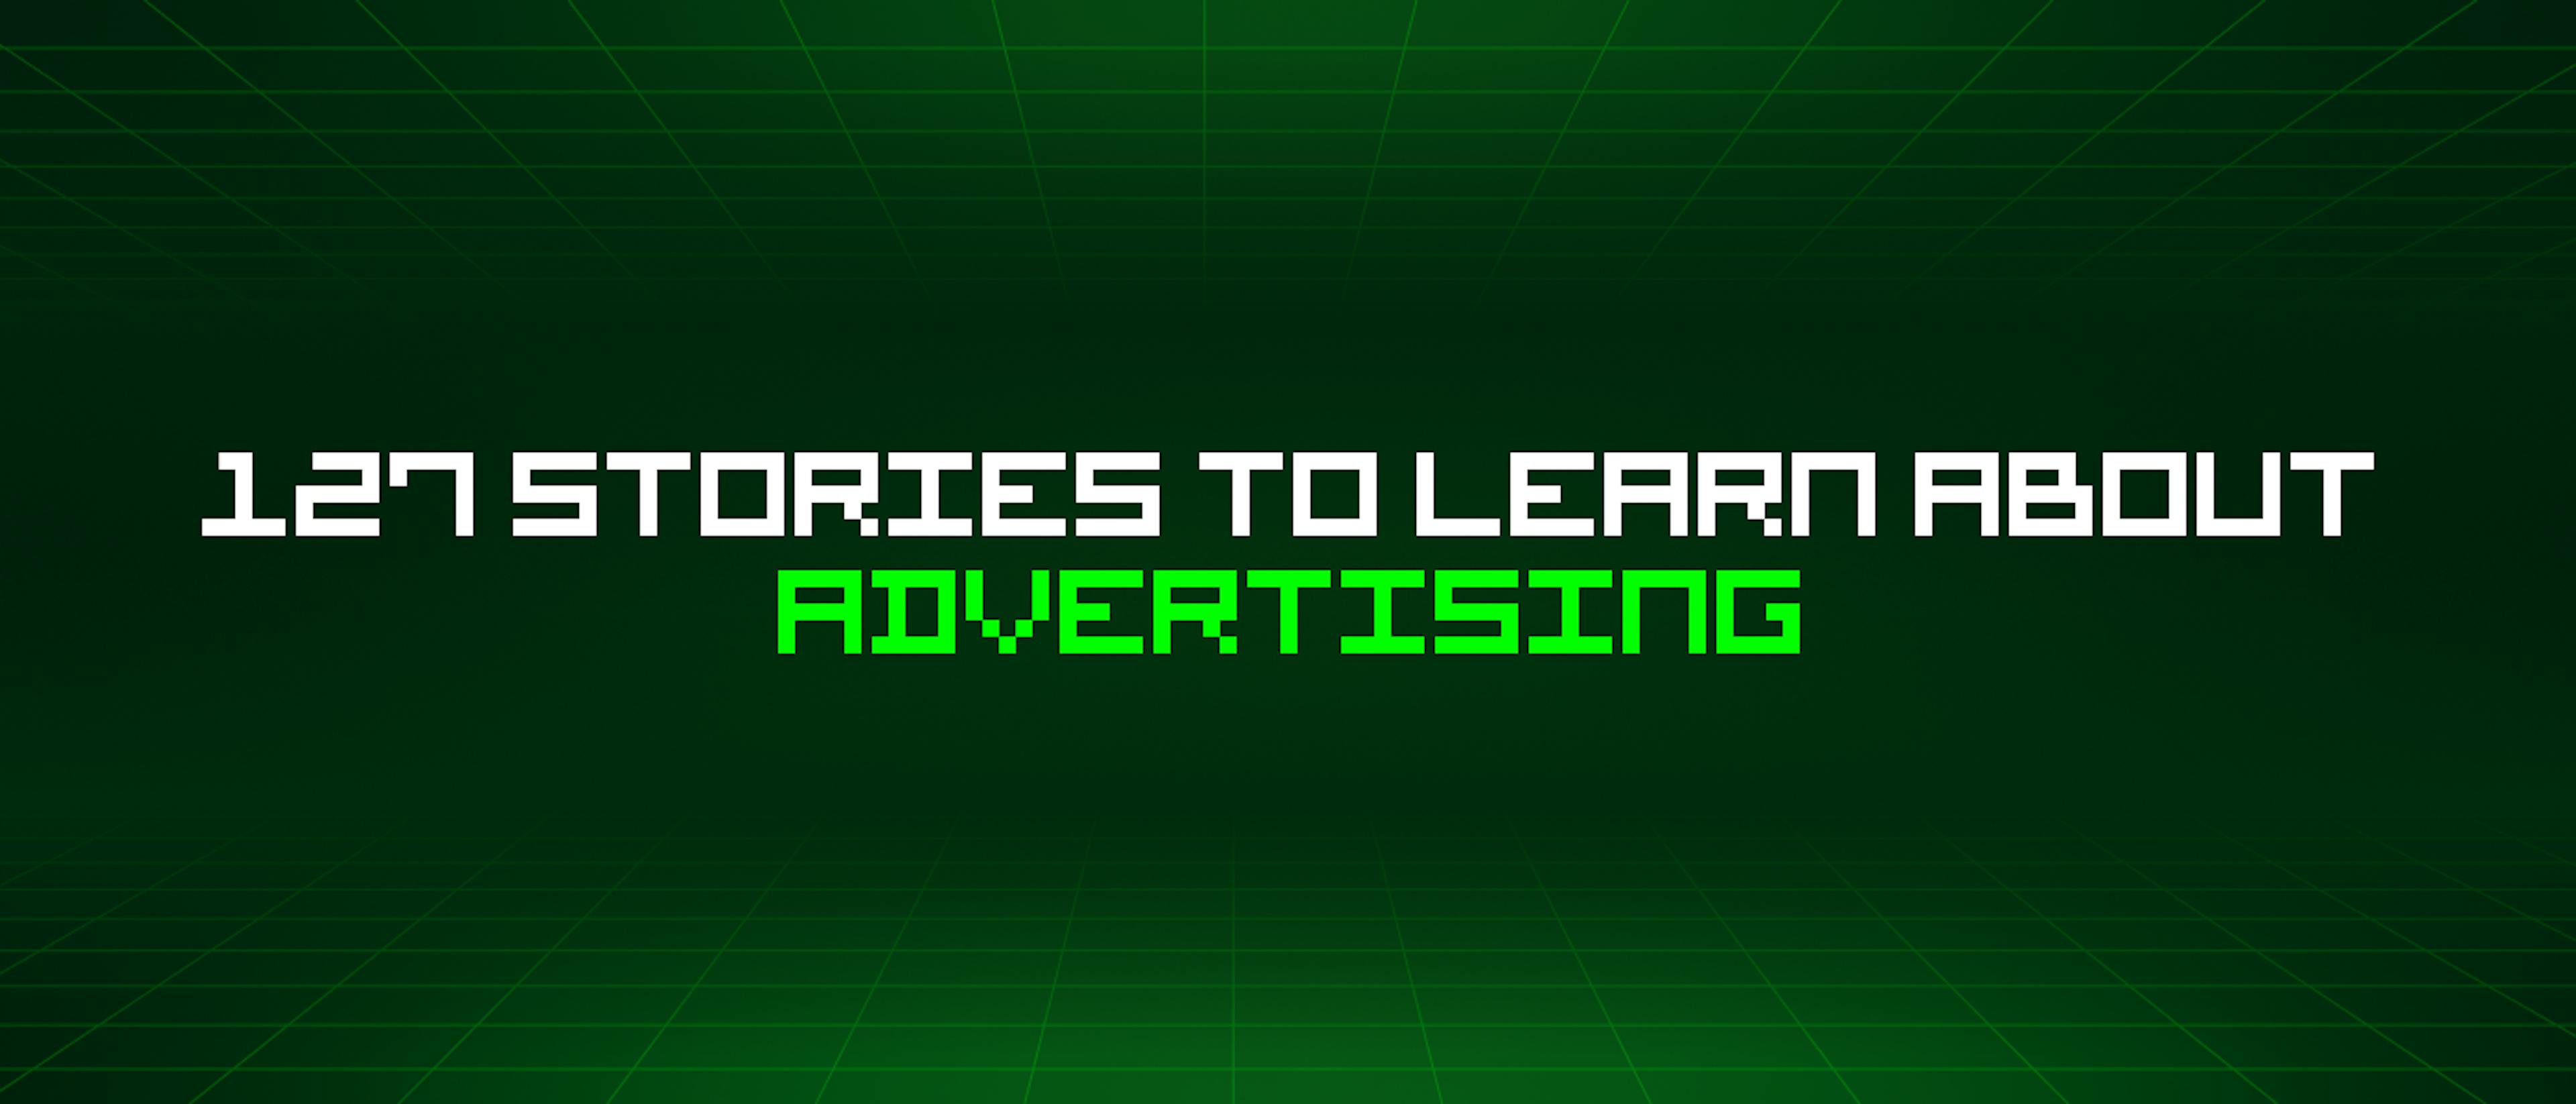 /127-stories-to-learn-about-advertising feature image